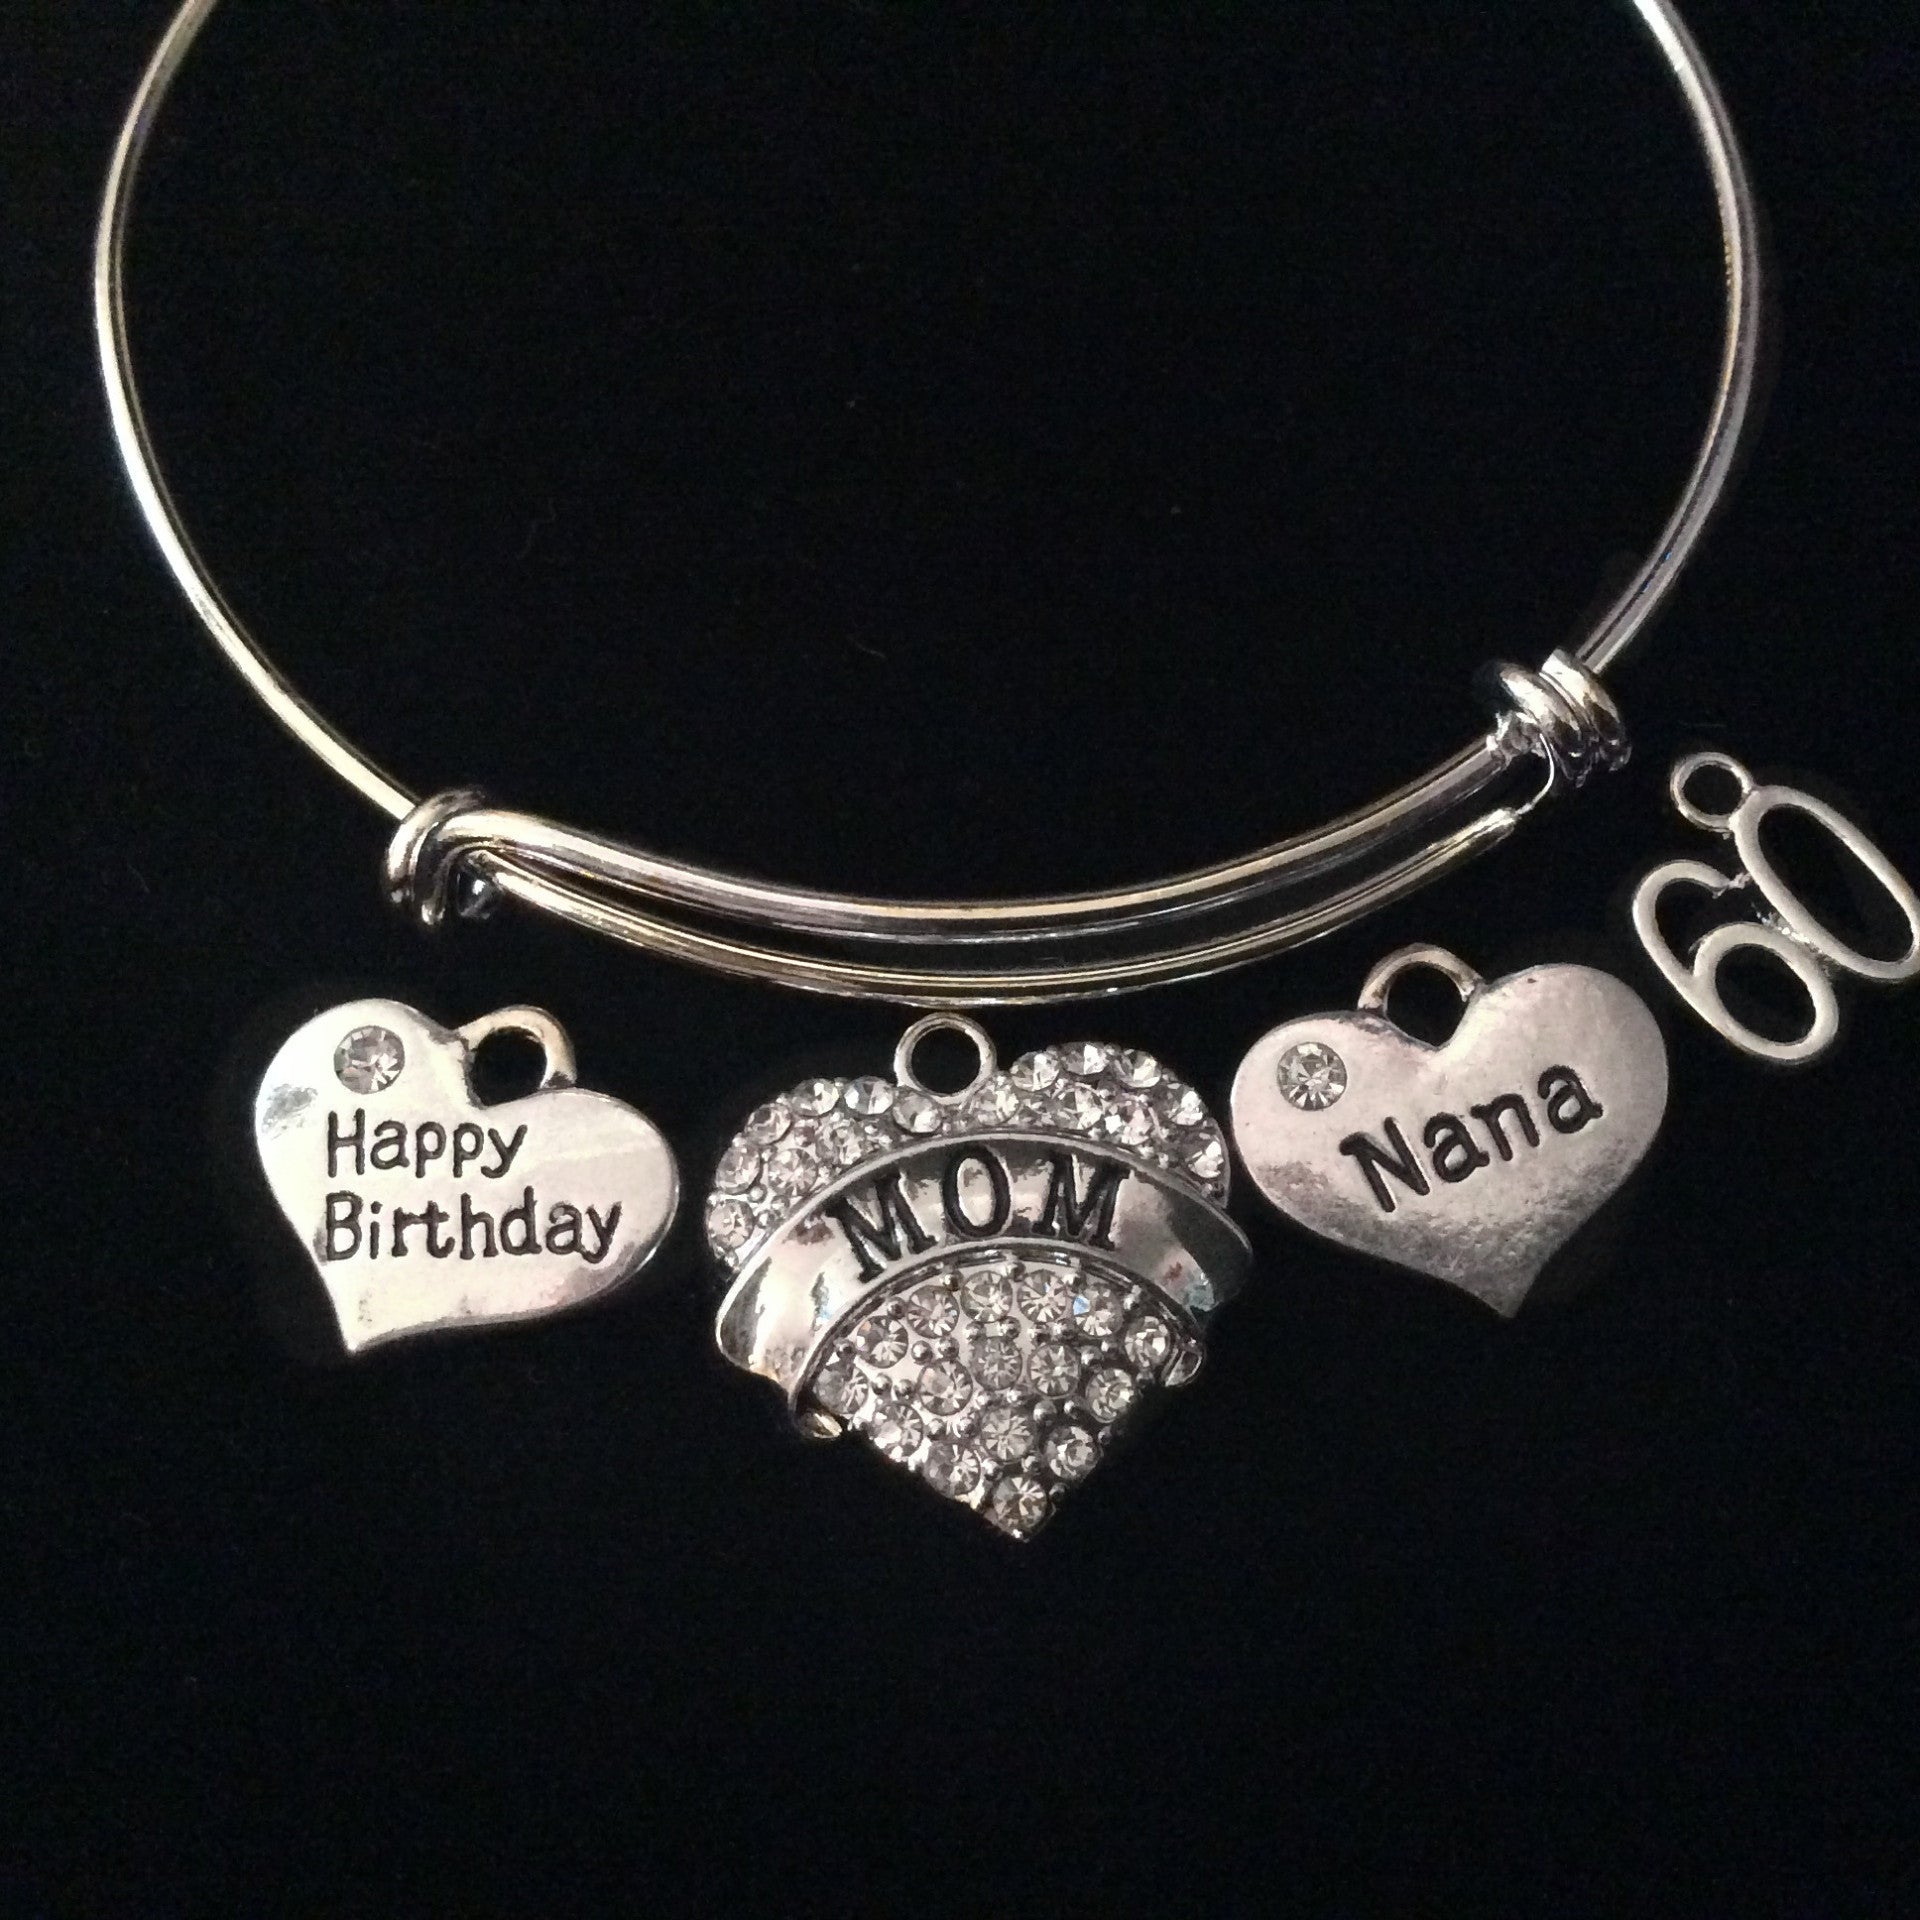 60th birthday jewelry for mom